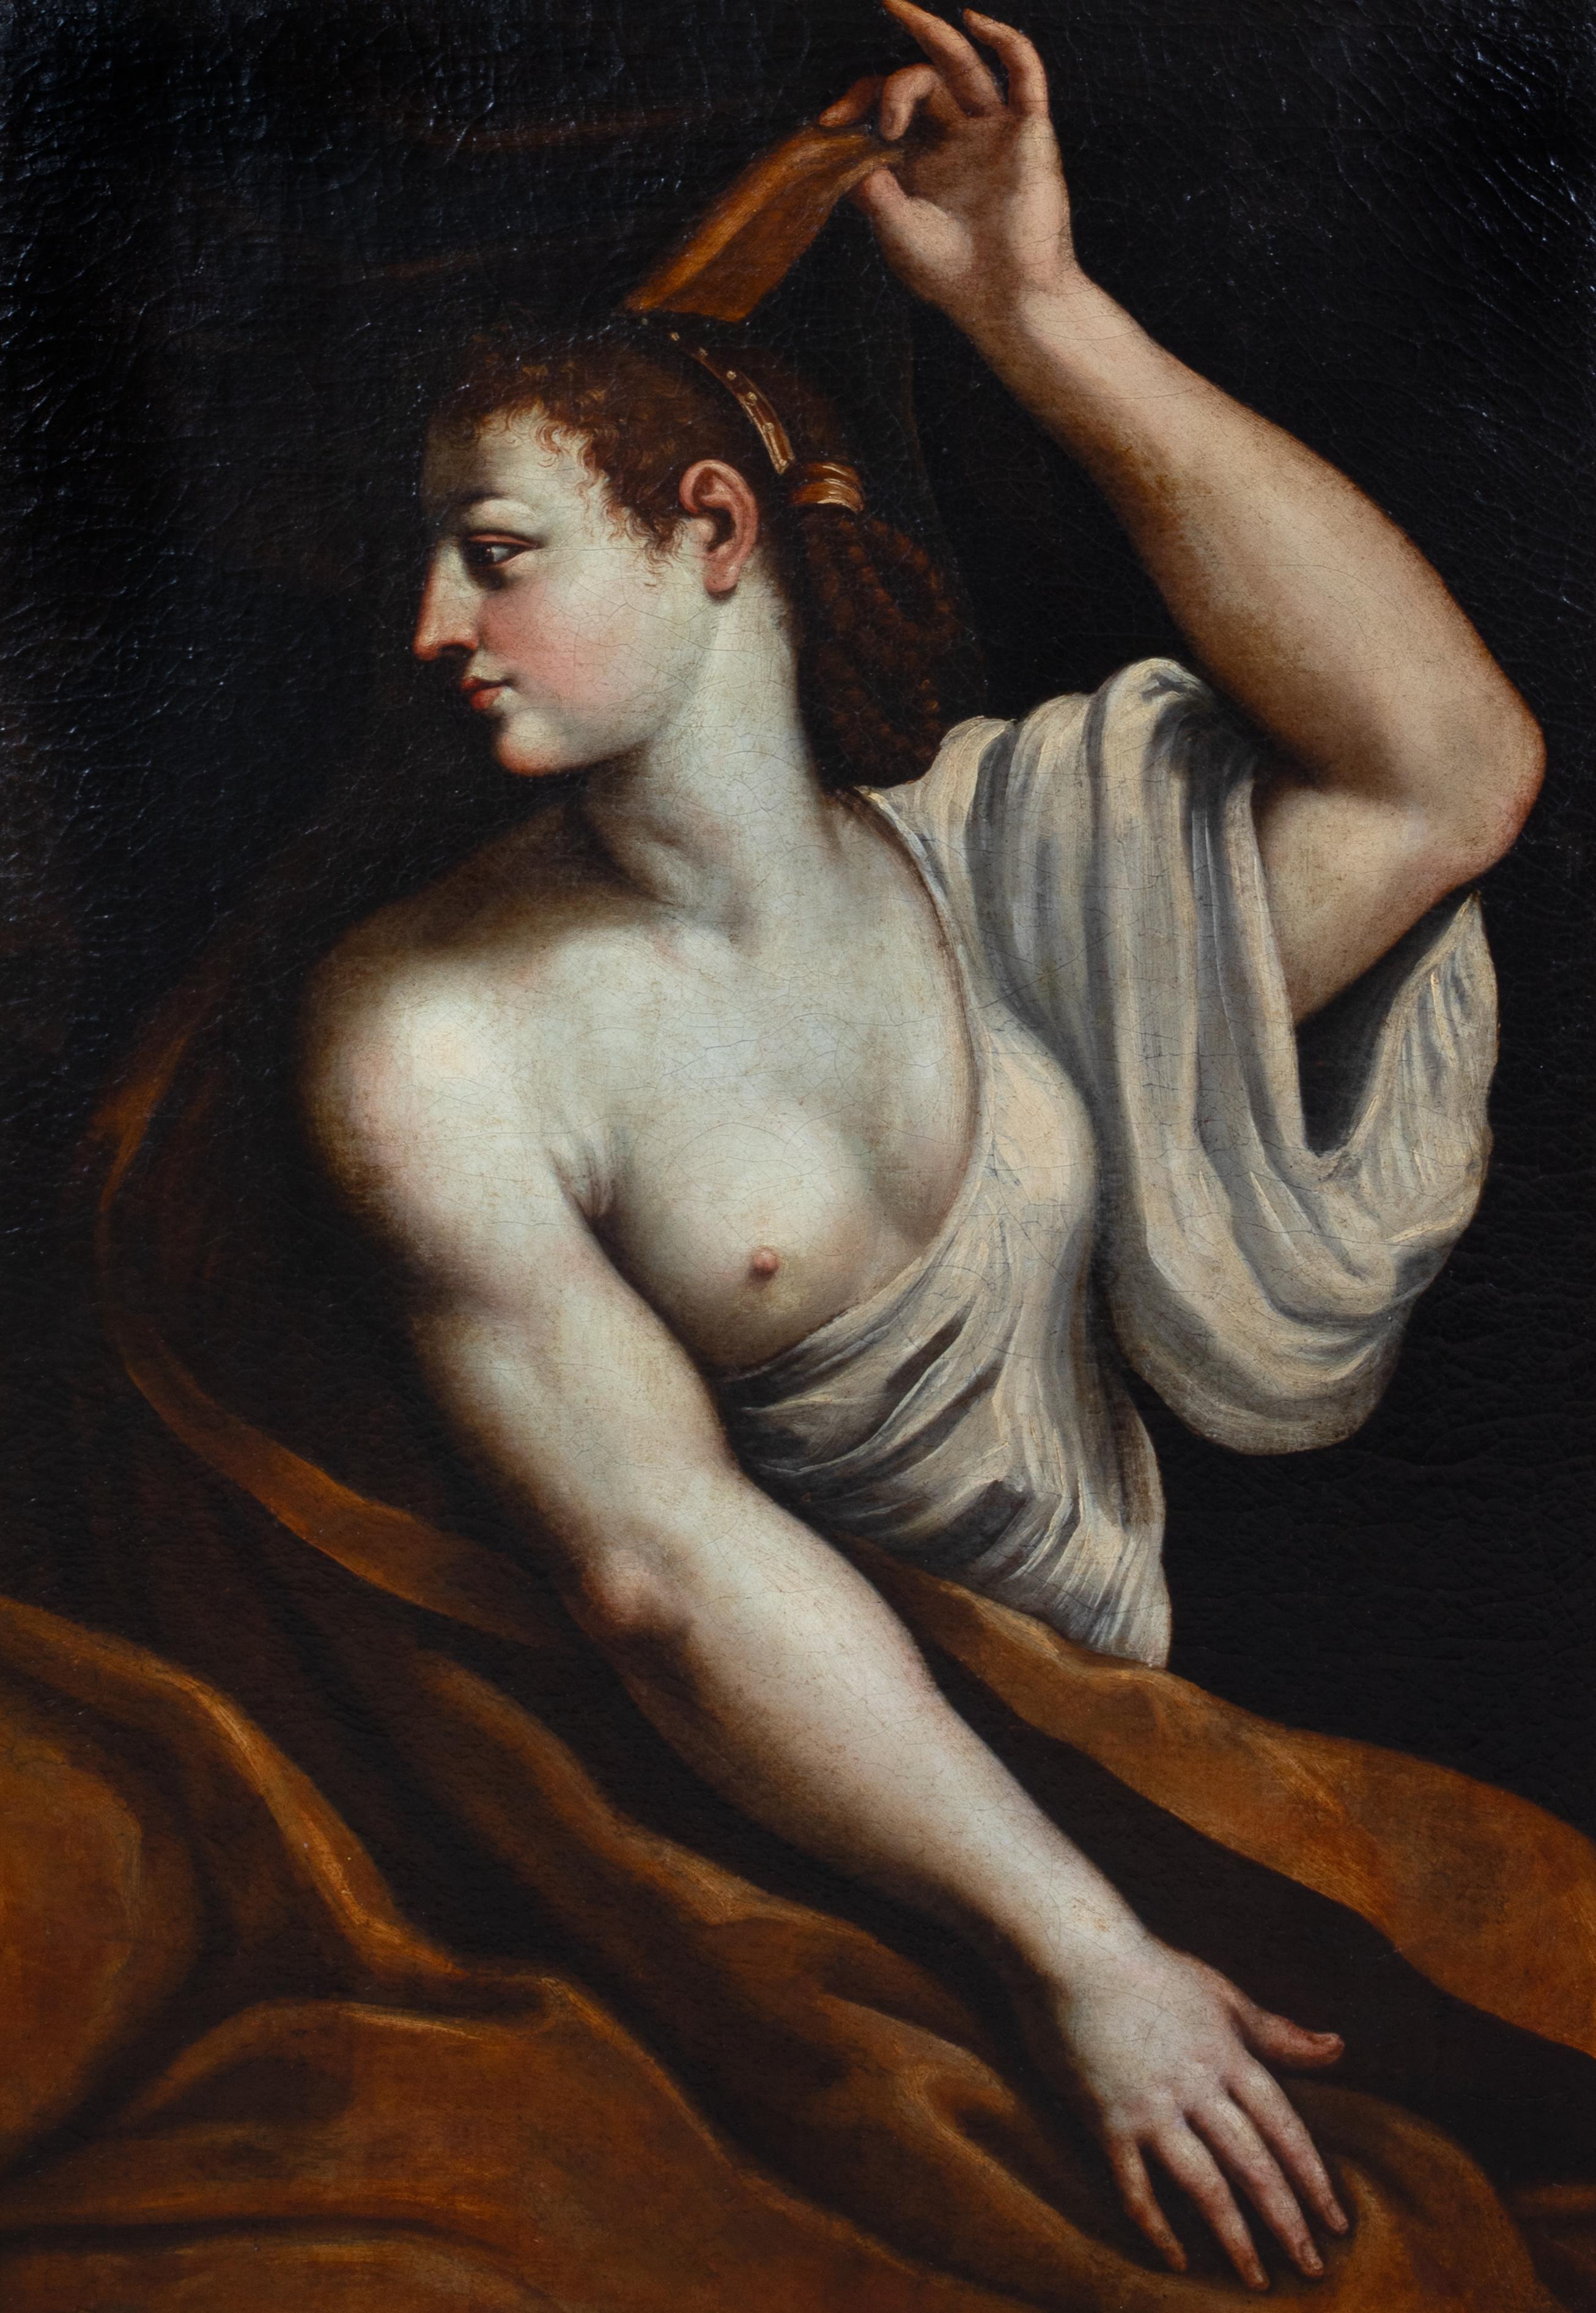 Semele, 17th Century

Italian School

Large 17th Century Italian School Old Master depiction of Semele before her rape by Zeus, oil on canvas. Excellent quality and condition circa 1650 three quarter length depiction of Semele, the Theban Princess